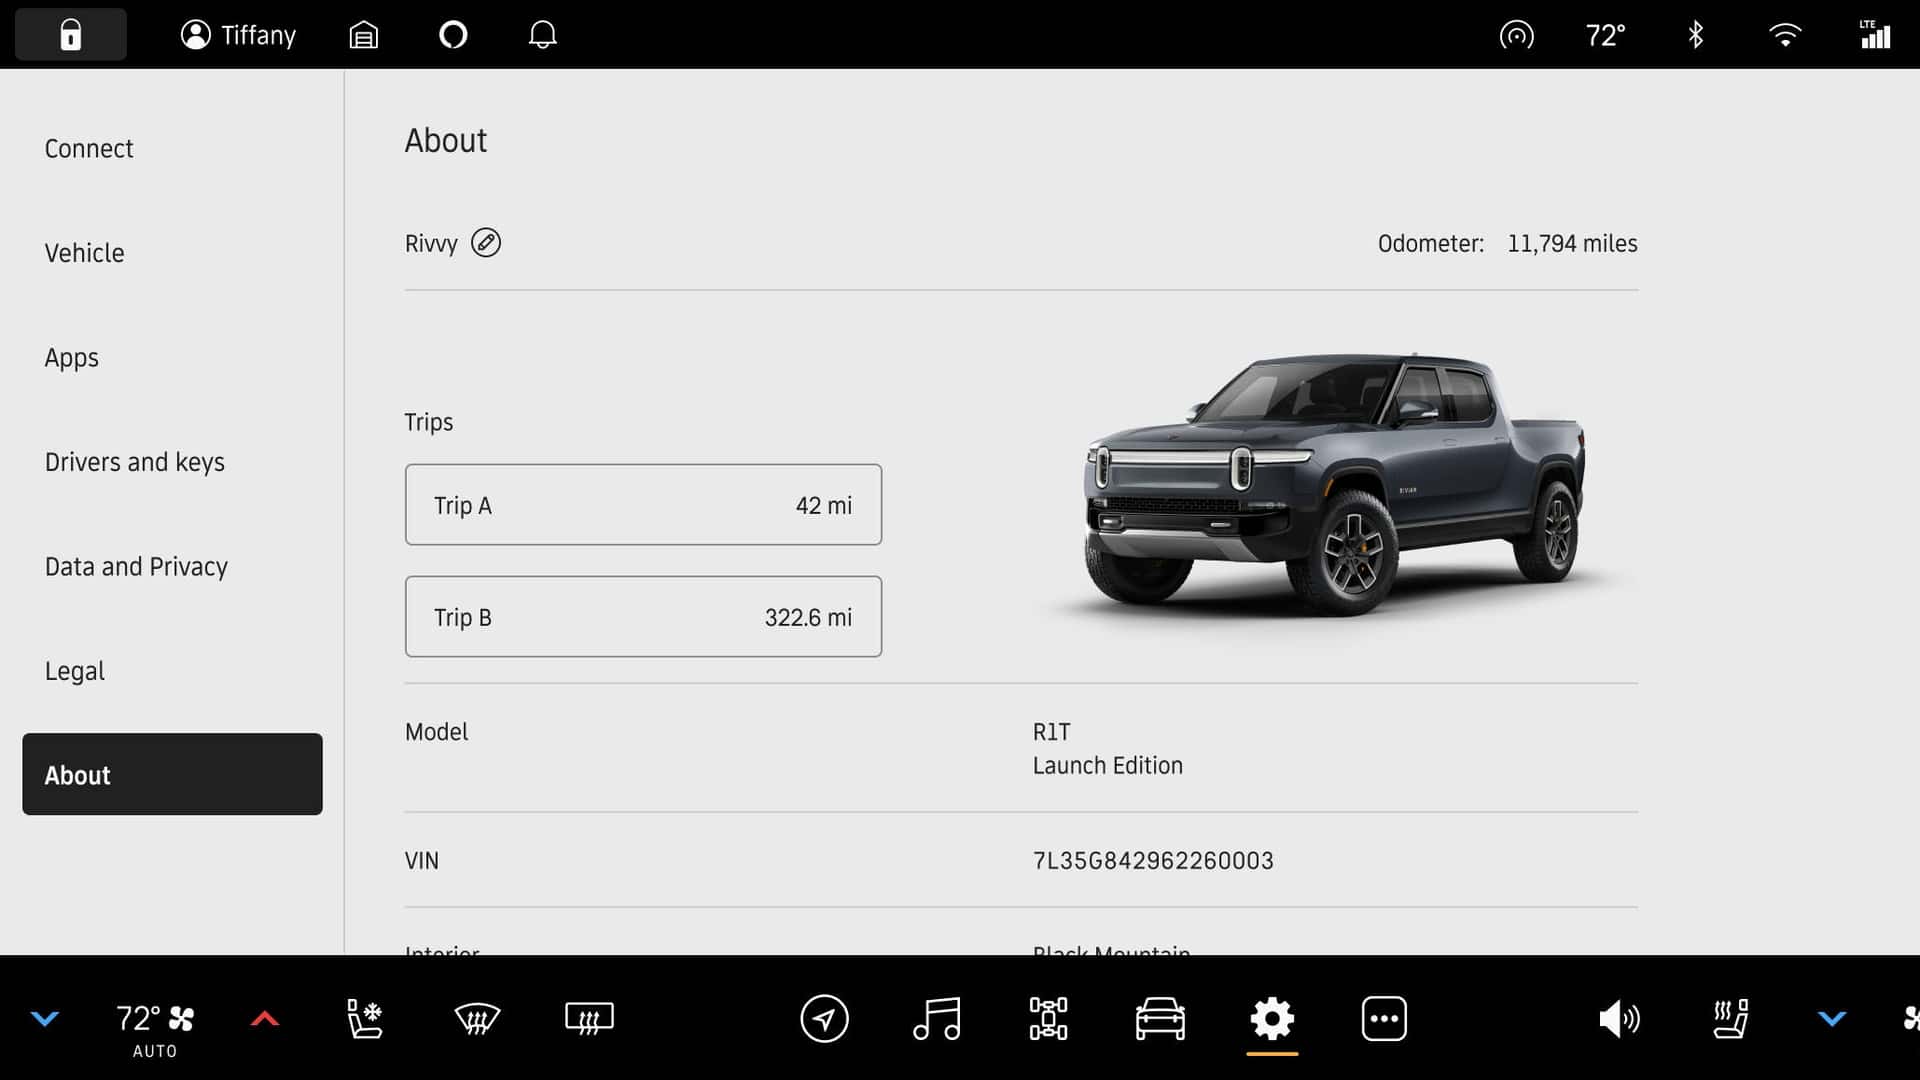 rivian adds drive cam, charge limit slider via software update